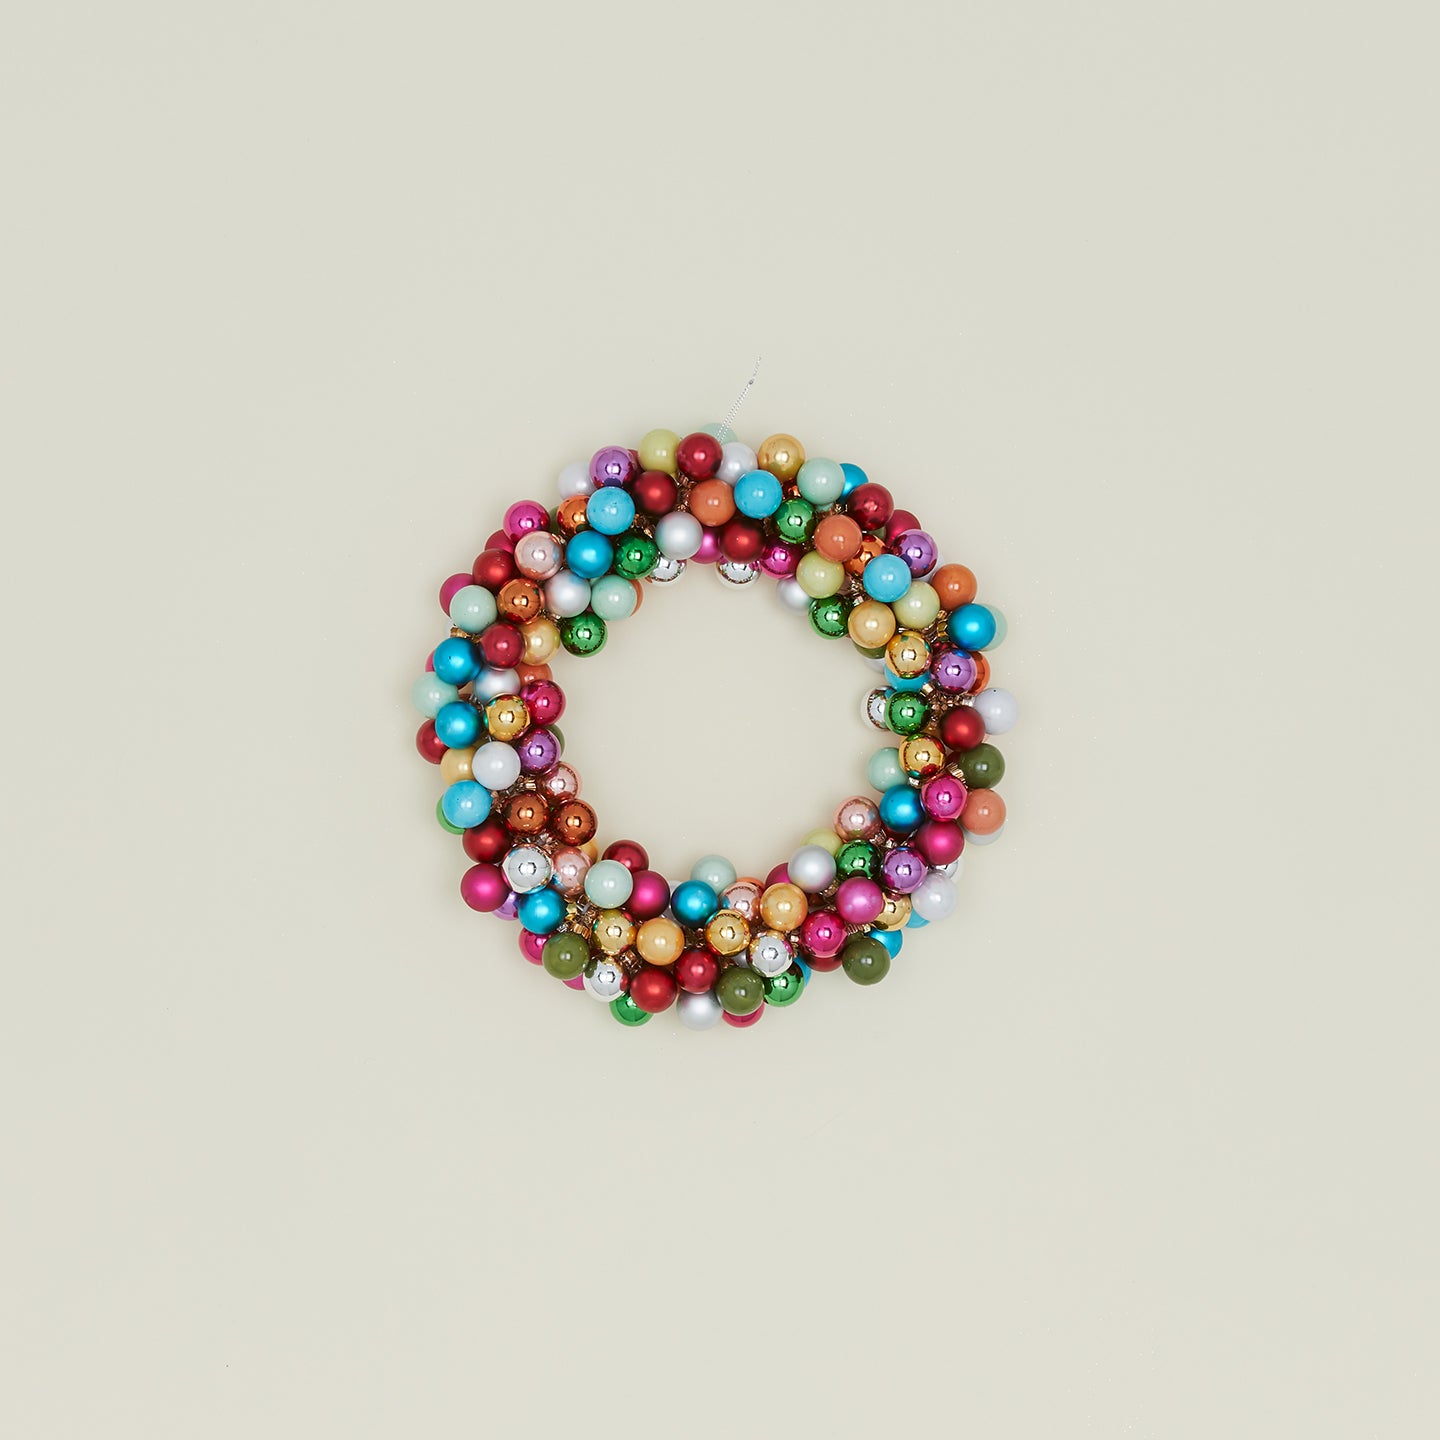 Small Merry + Bright Bauble Wreath